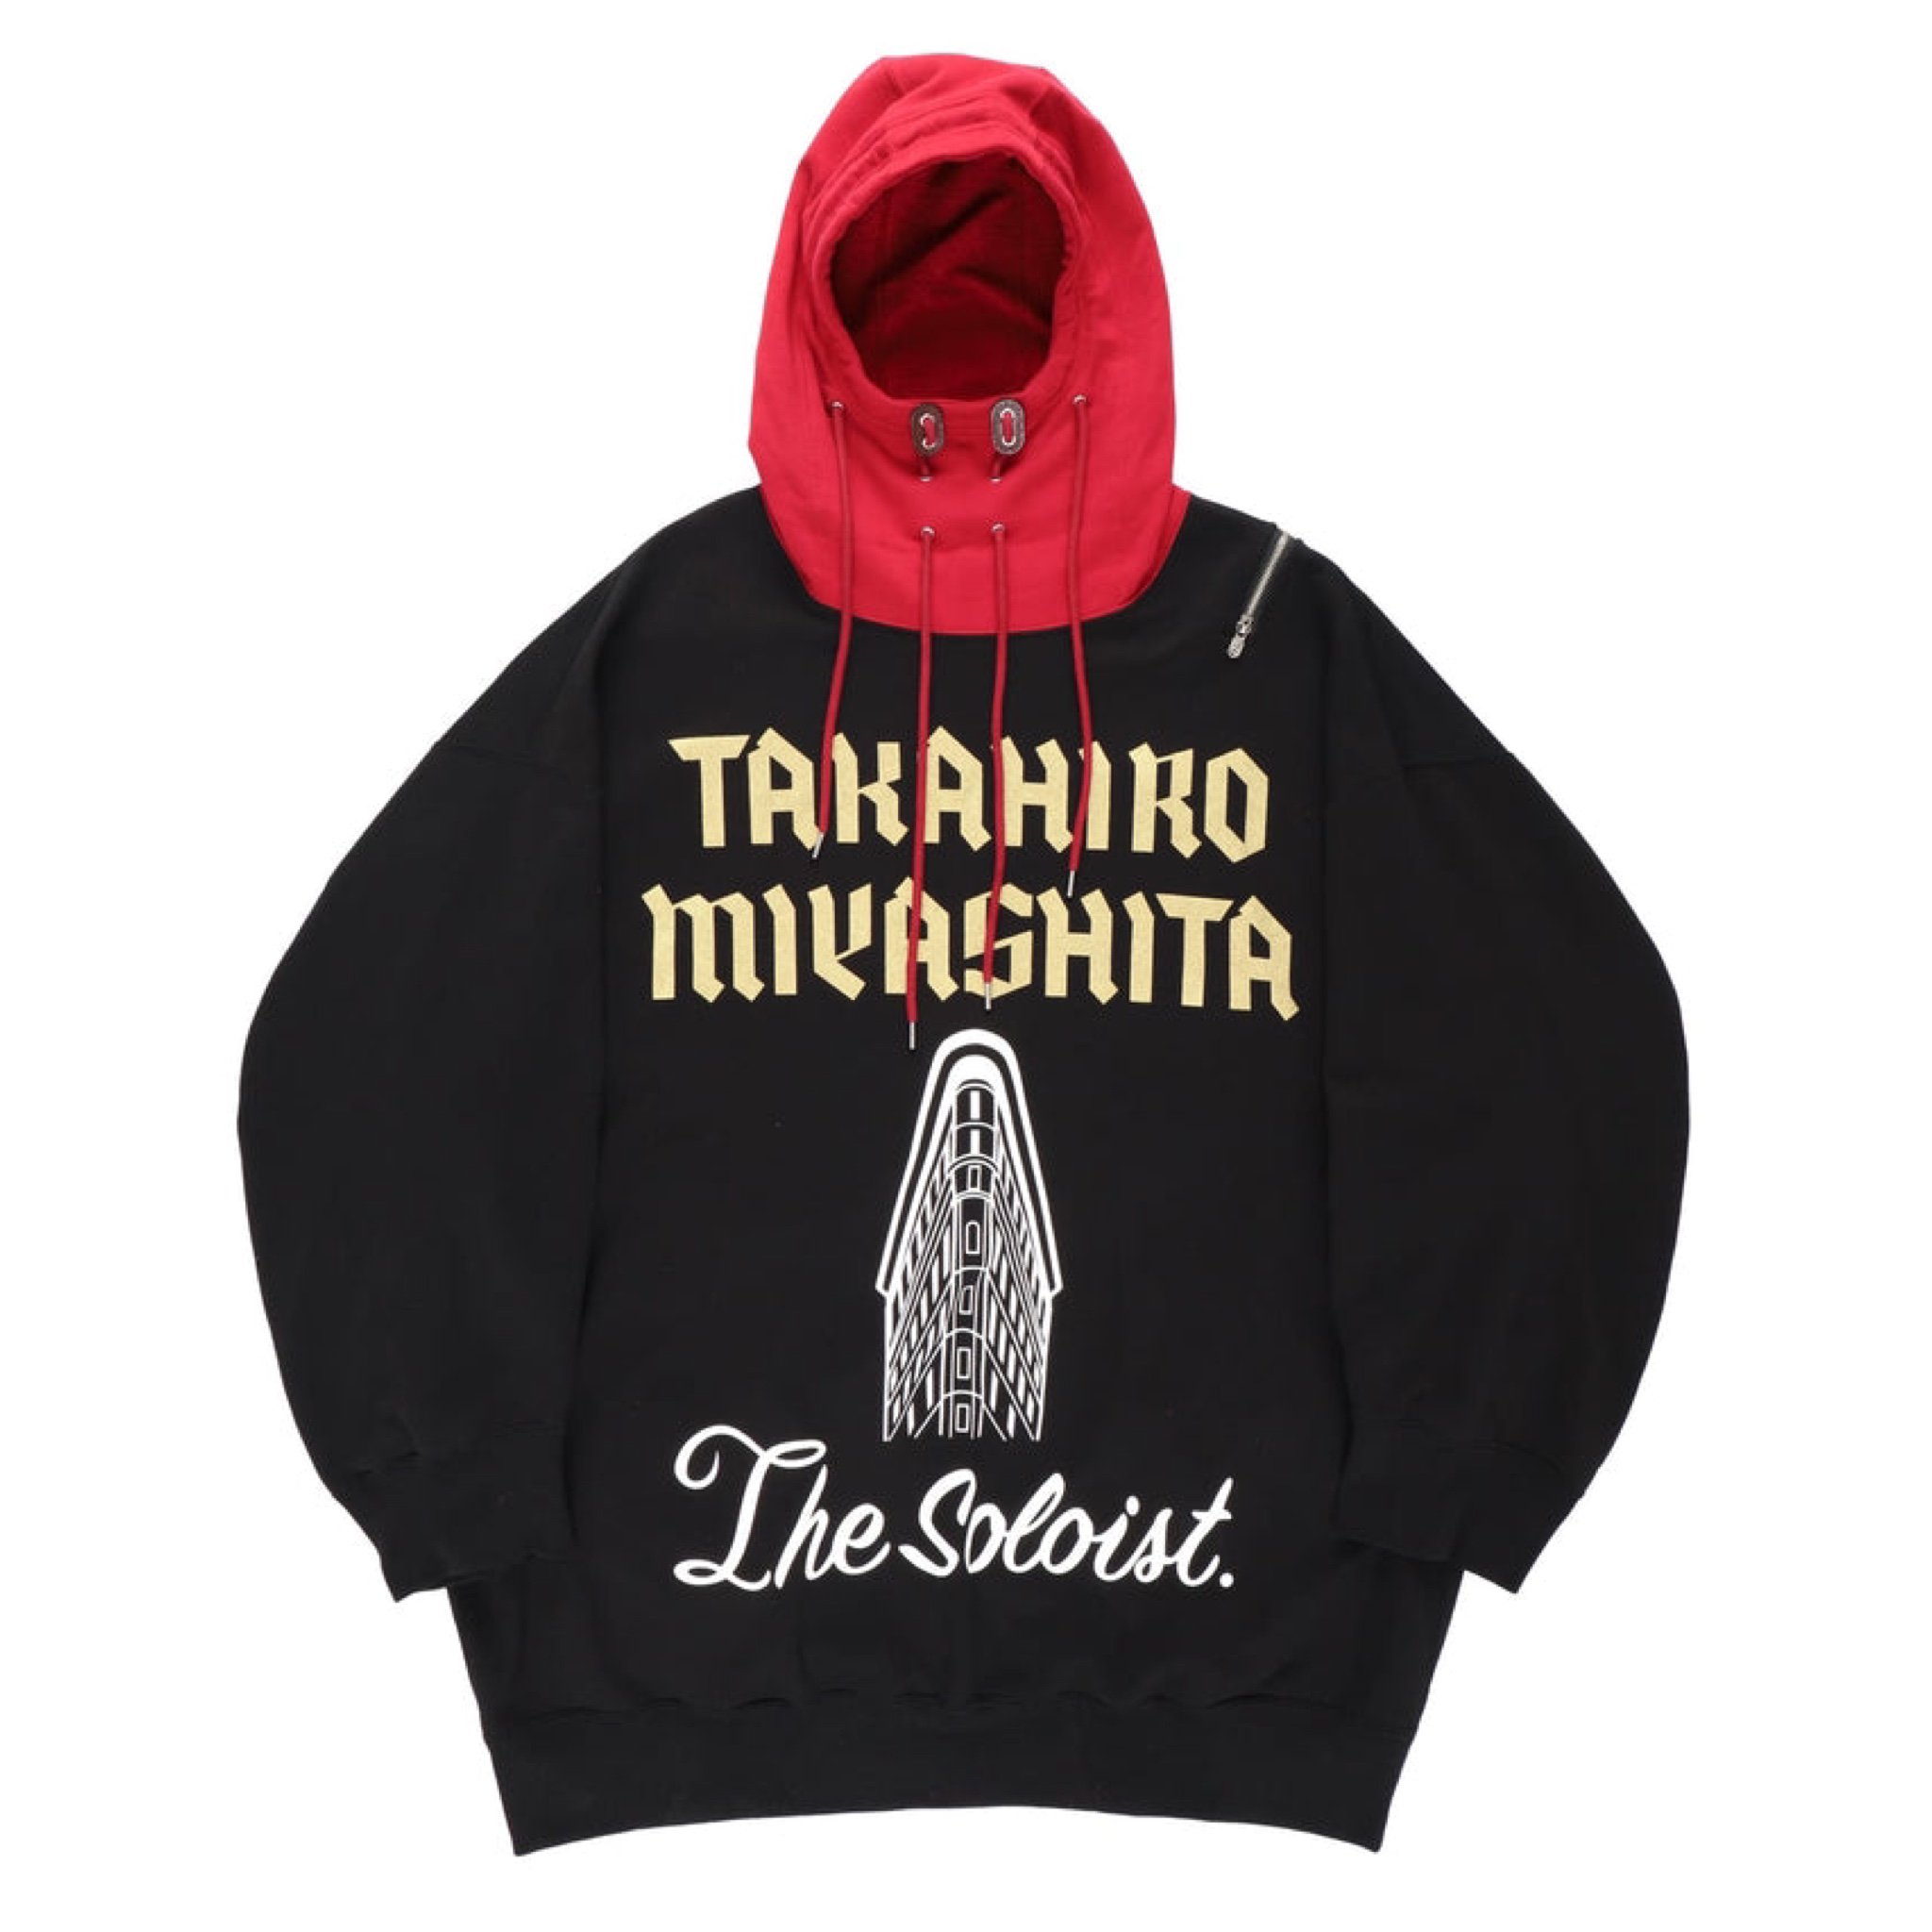 【The Soloist.】<br>double zip<br>balloon shaped hoodie.